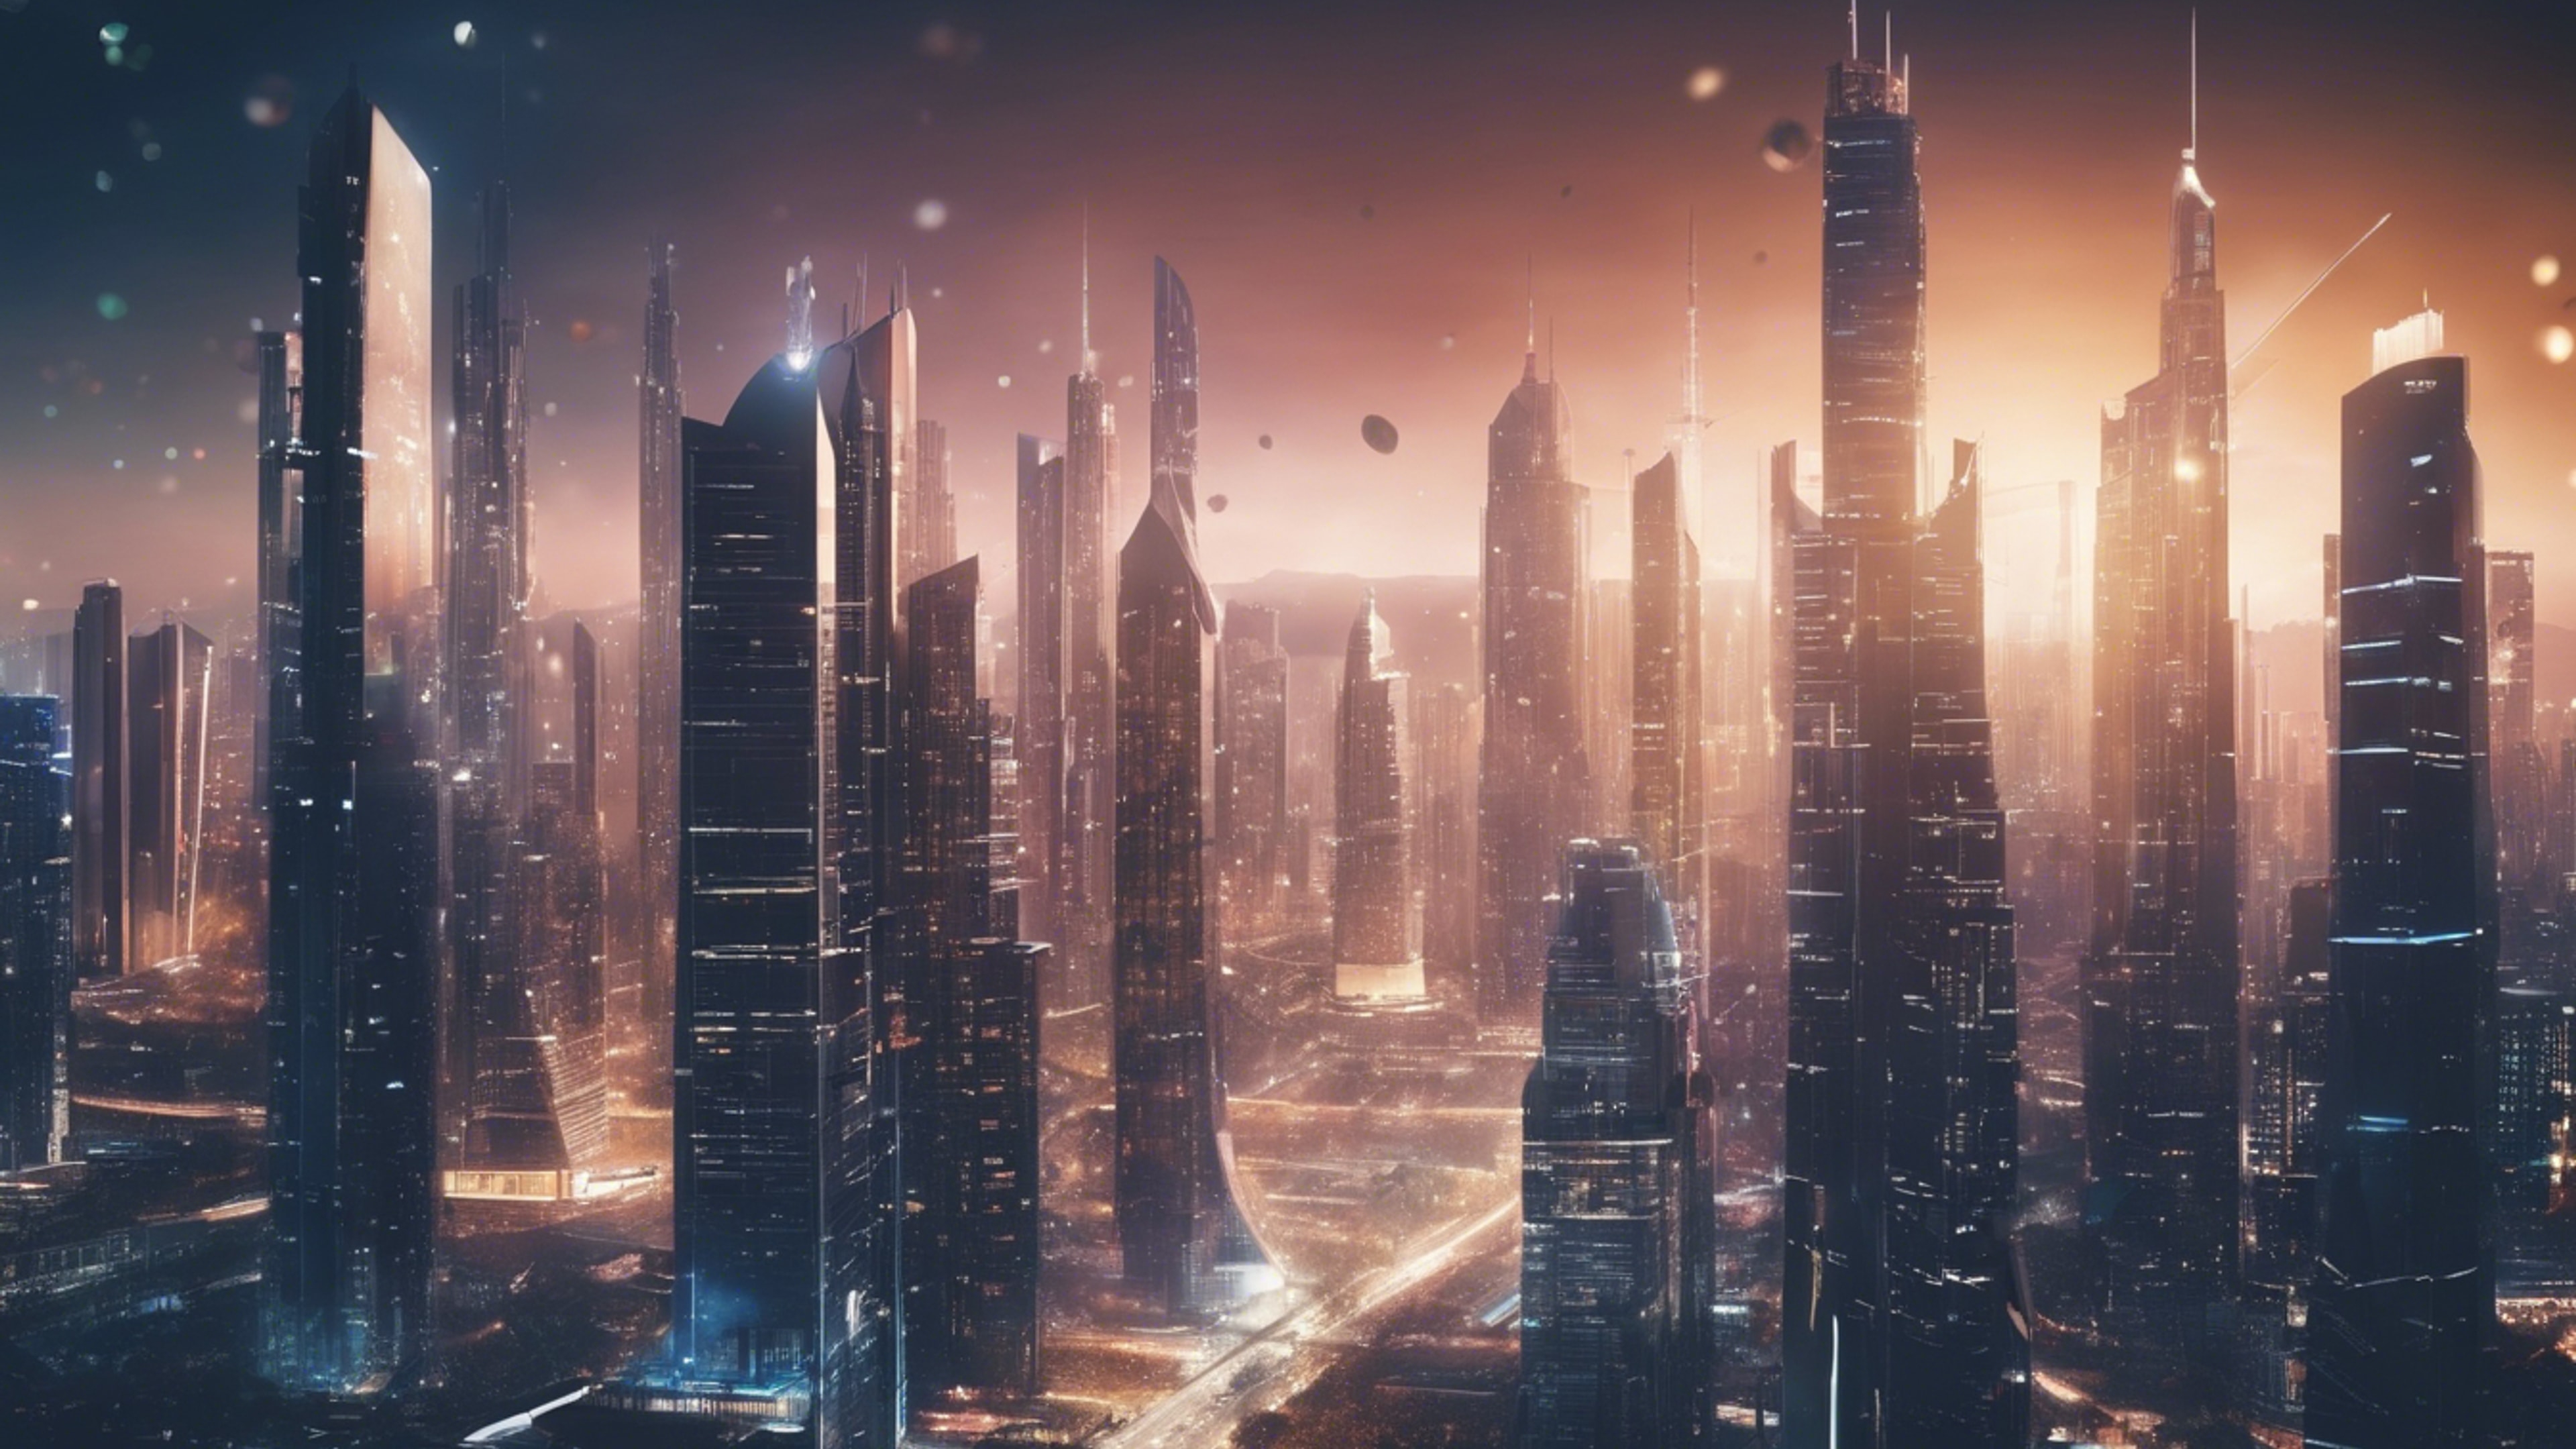 A detailed illustration of a megalopolis skyline with futuristic, AI-designed structures. Tapeta[5acce17a495b4f288757]